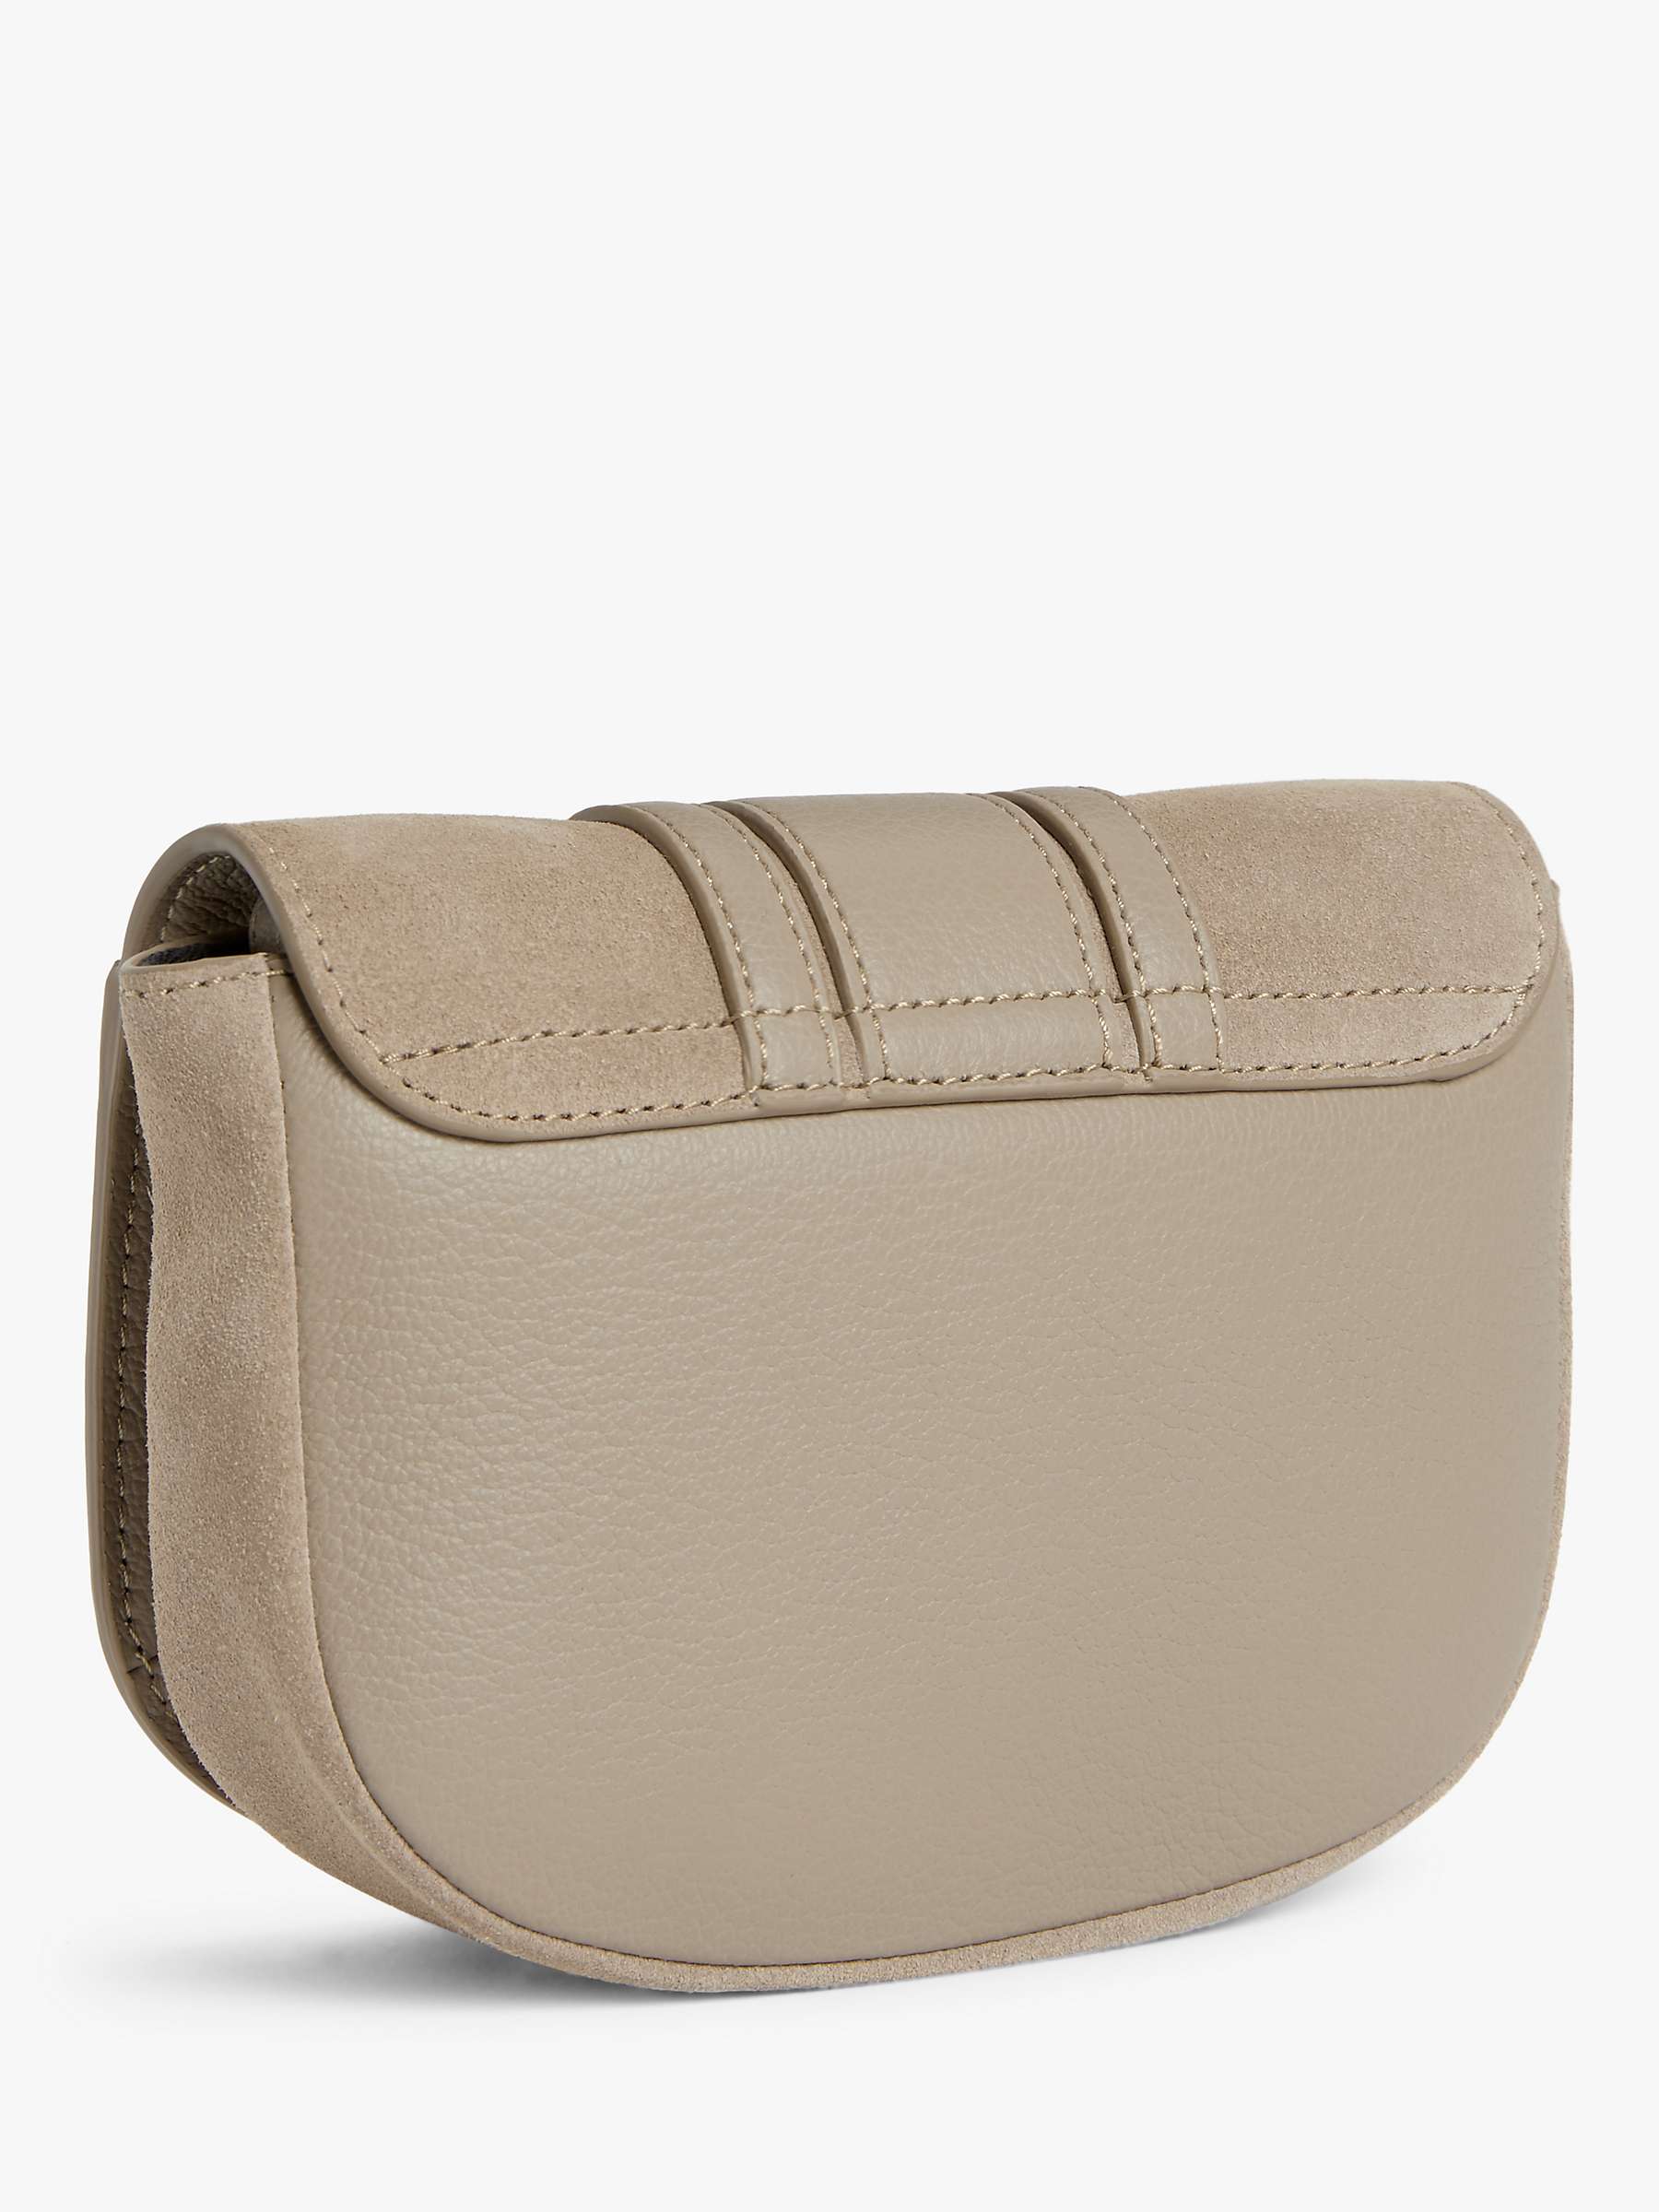 Buy See By Chloé Mini Hana Suede Leather Satchel Bag Online at johnlewis.com